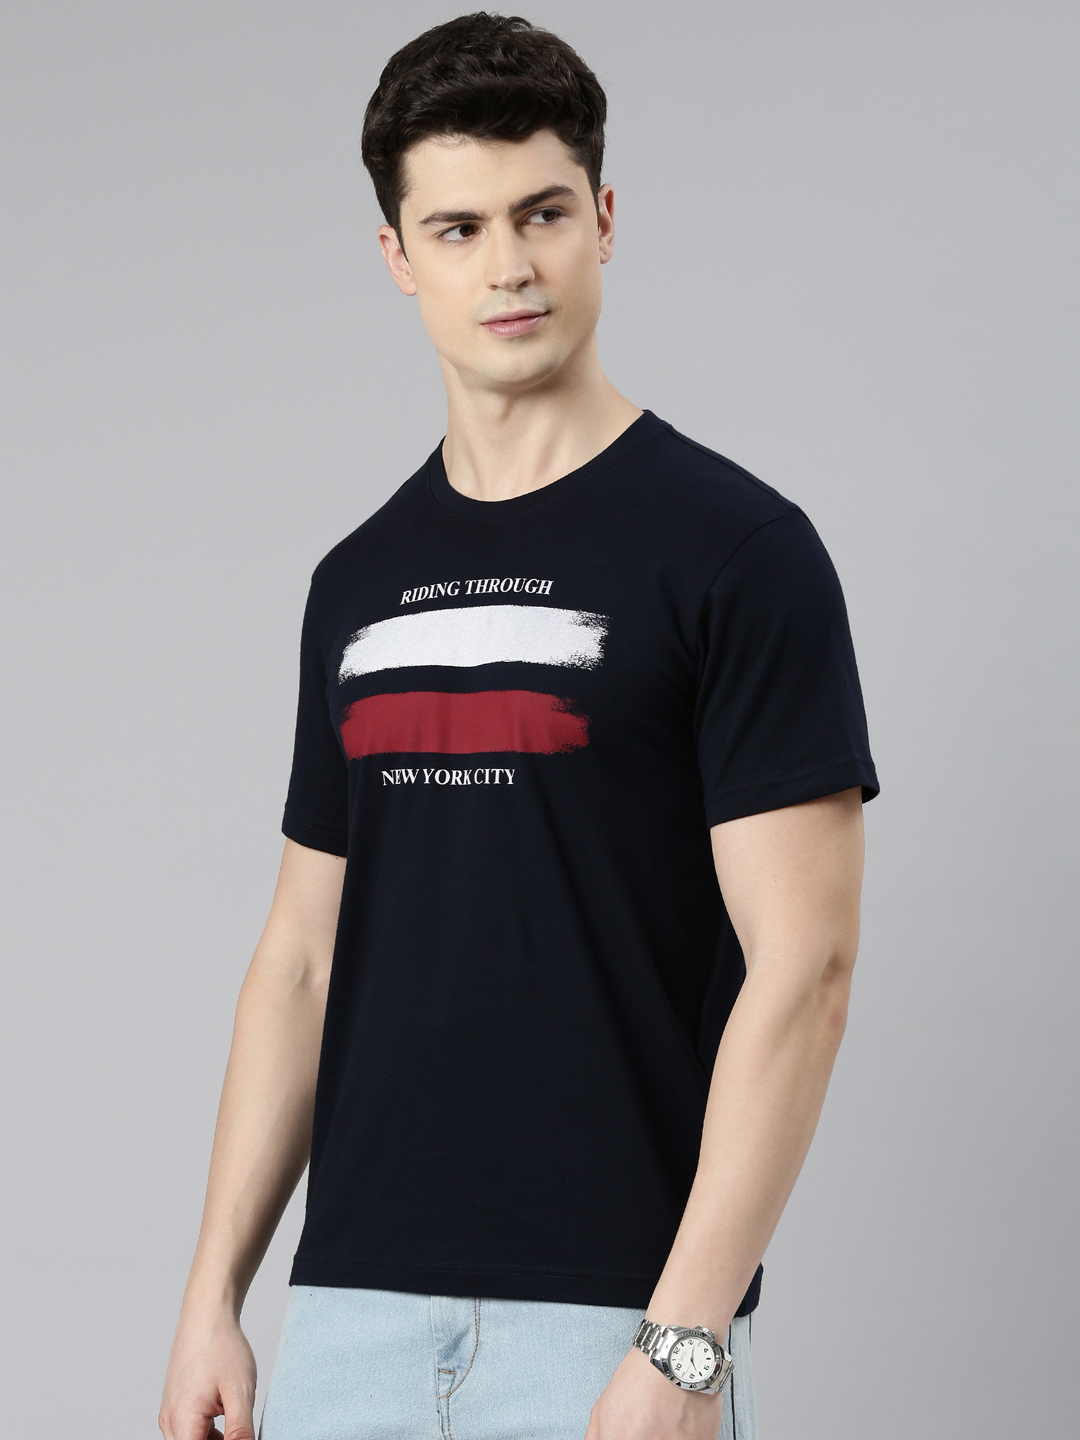 Classic Appeal Typography Printed Crew Neck T-Shirt–SA3500-SQ - FASO